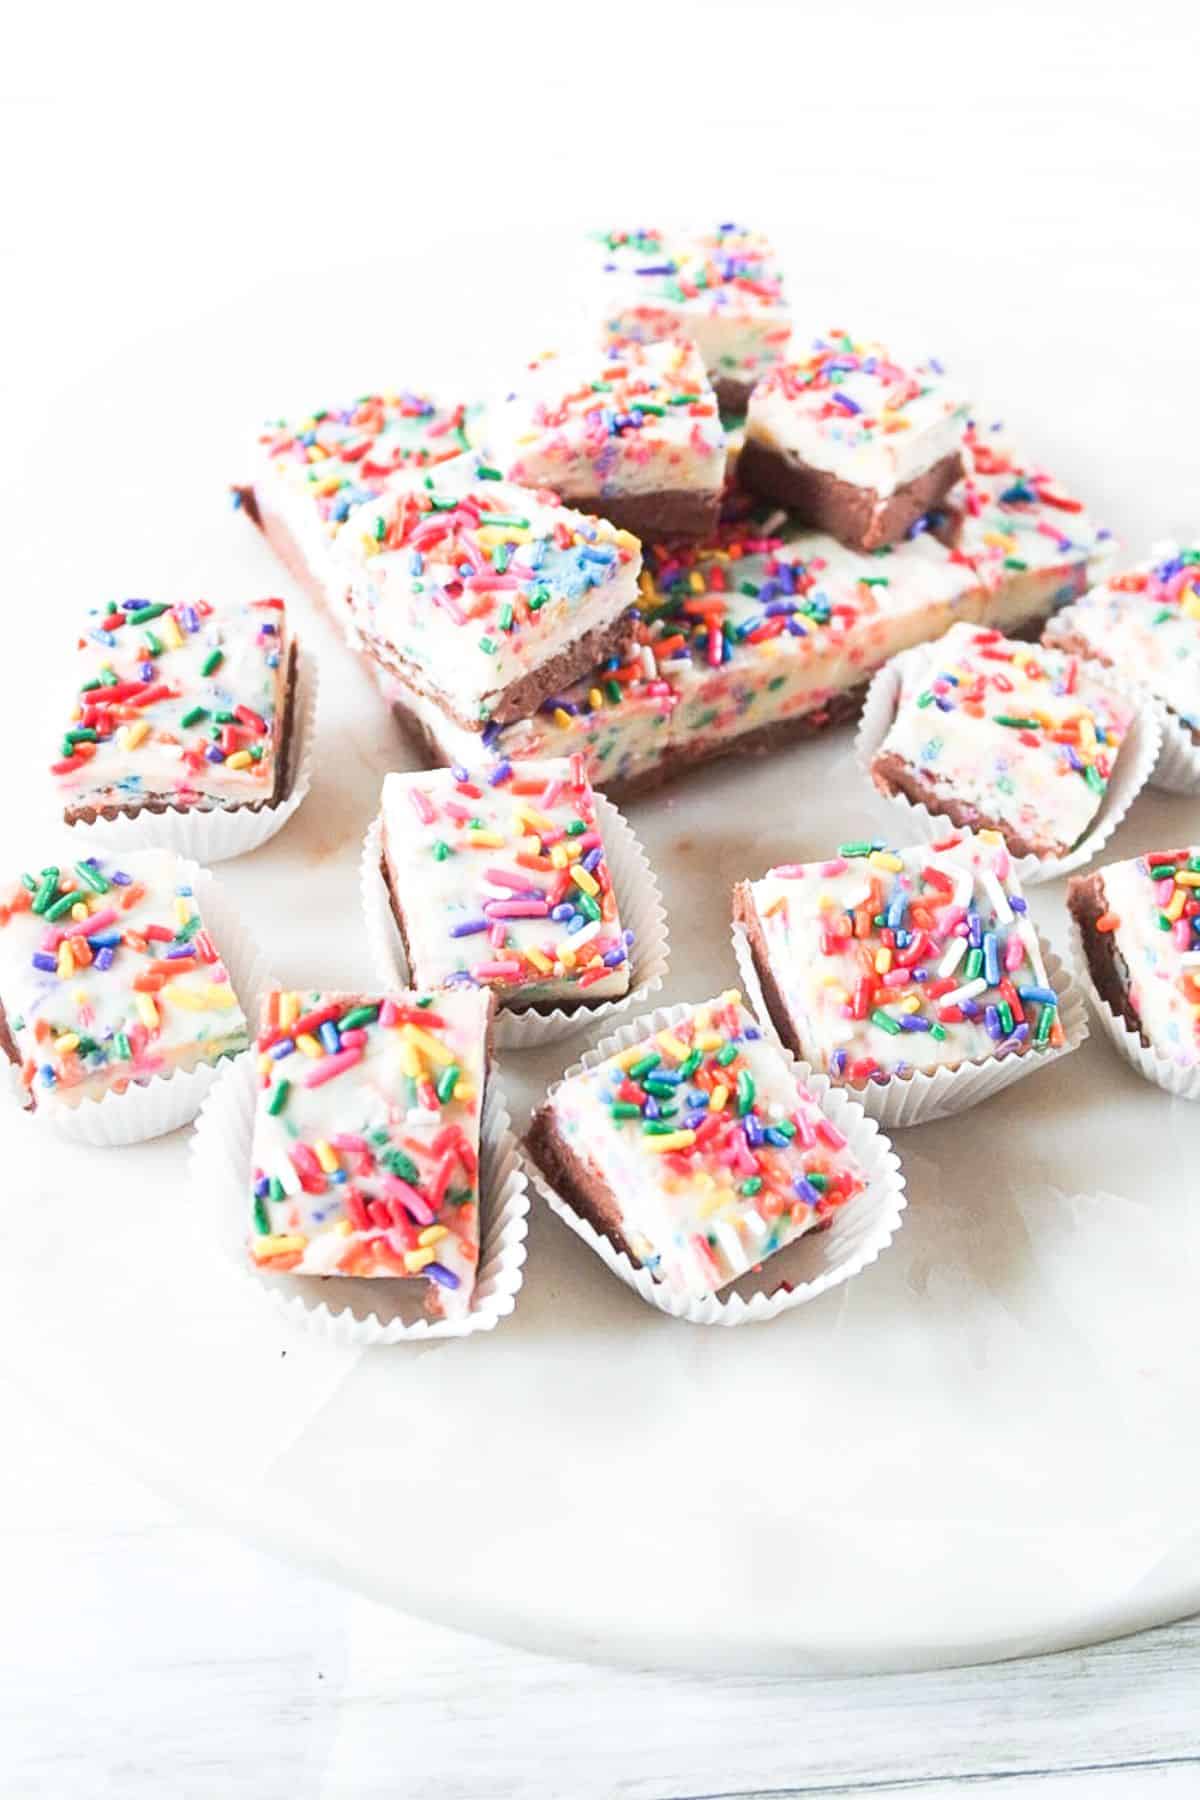 A Funfetti fudge with sprinkles on a serving plate.